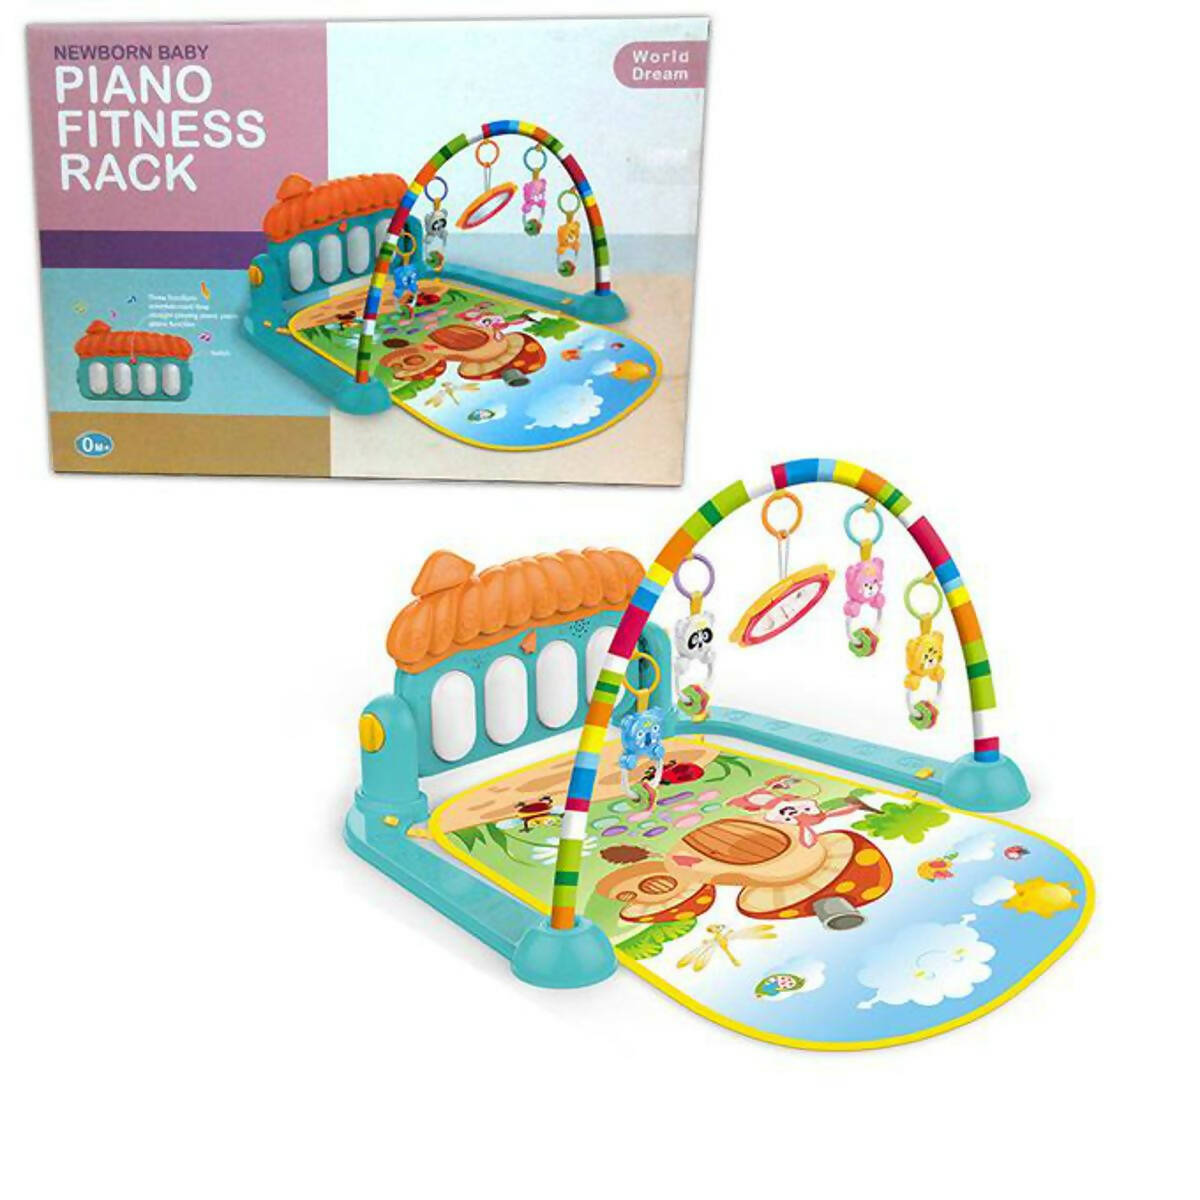 Piano Fitness Baby Gym Play Mat